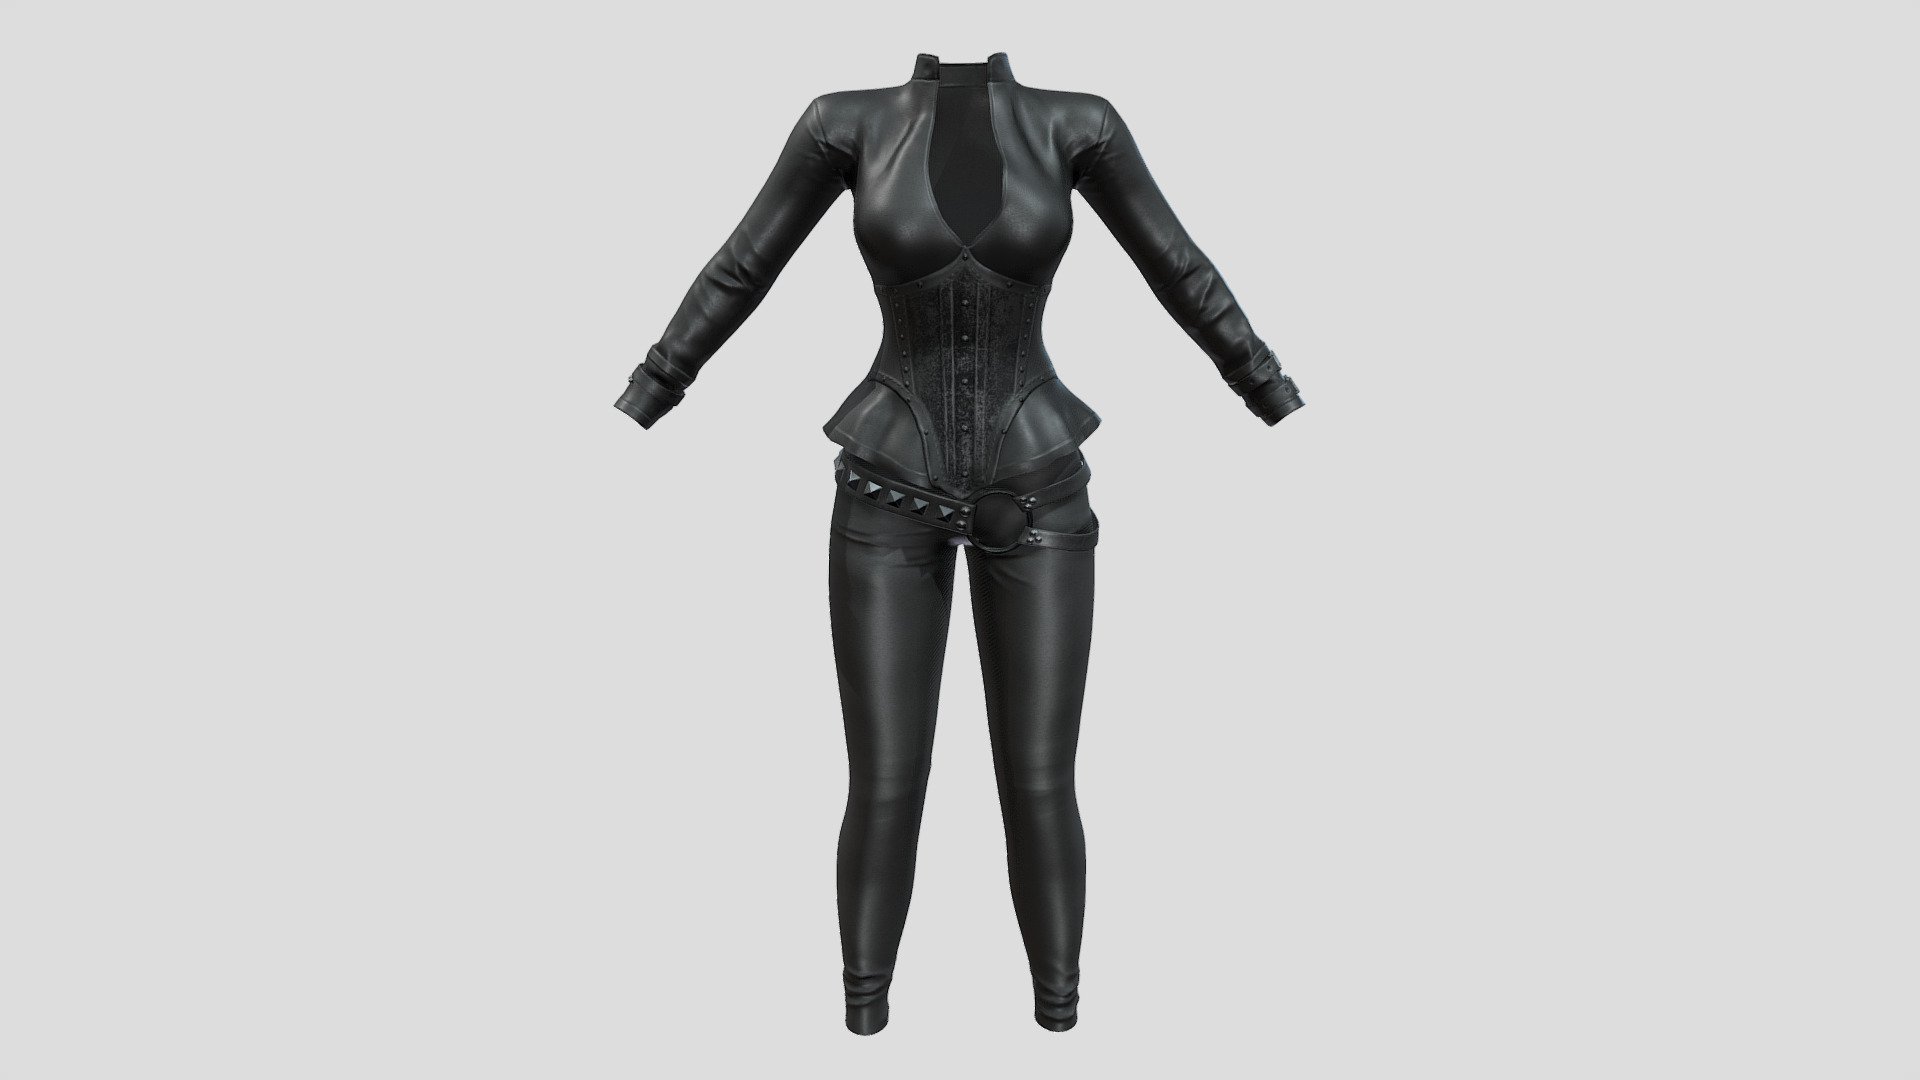 Female Black Leather Corset Jacket And Pants

Can be fitted to any character

Clean topology

No overlapping smart optimized unwrapped UVs

High-quality realistic textures

FBX, OBJ, gITF, USDZ (request other formats)

PBR or Classic

Type     user:3dia &ldquo;search term